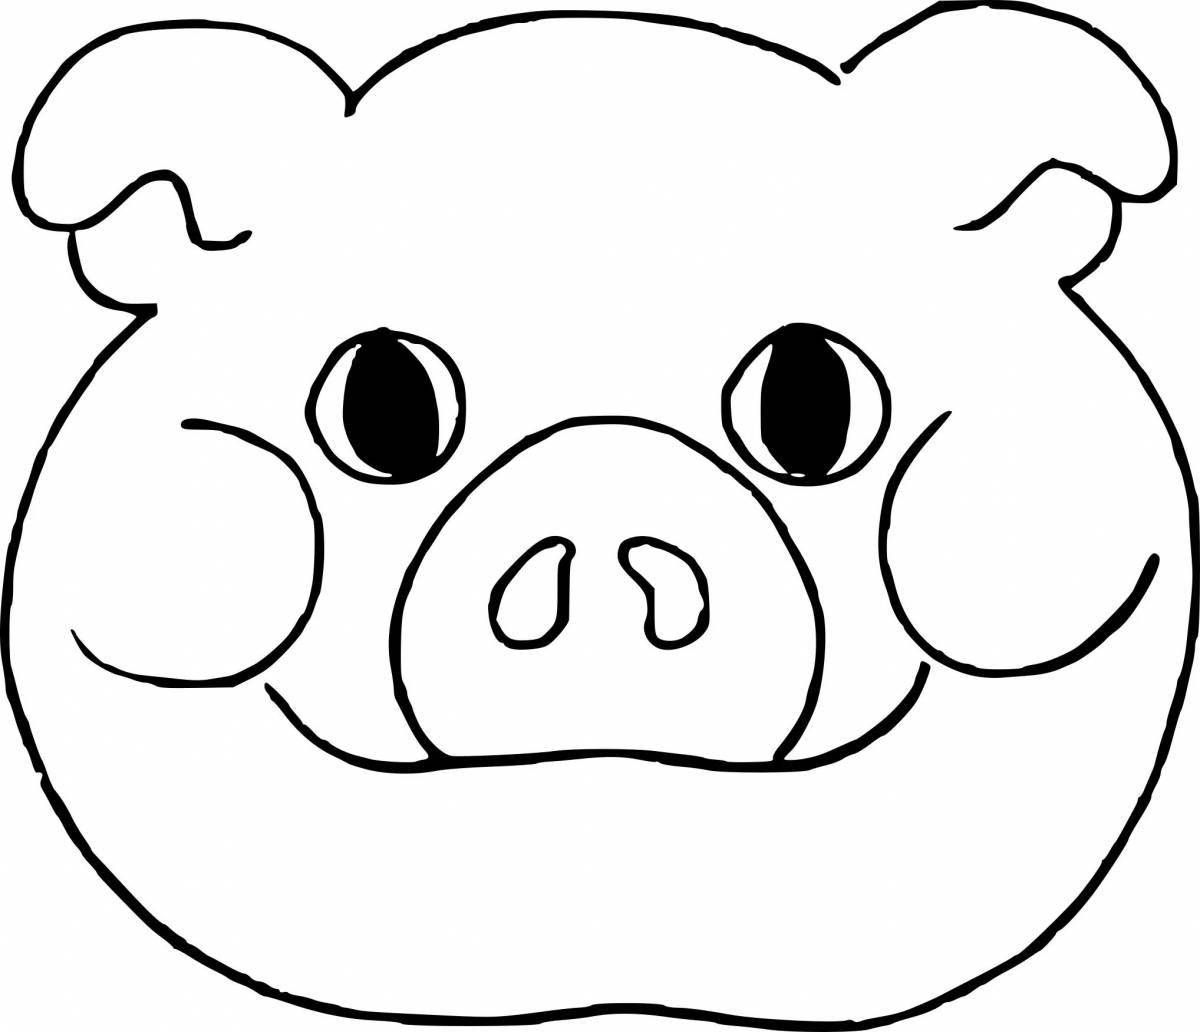 Coloring funny animal head mask for kids